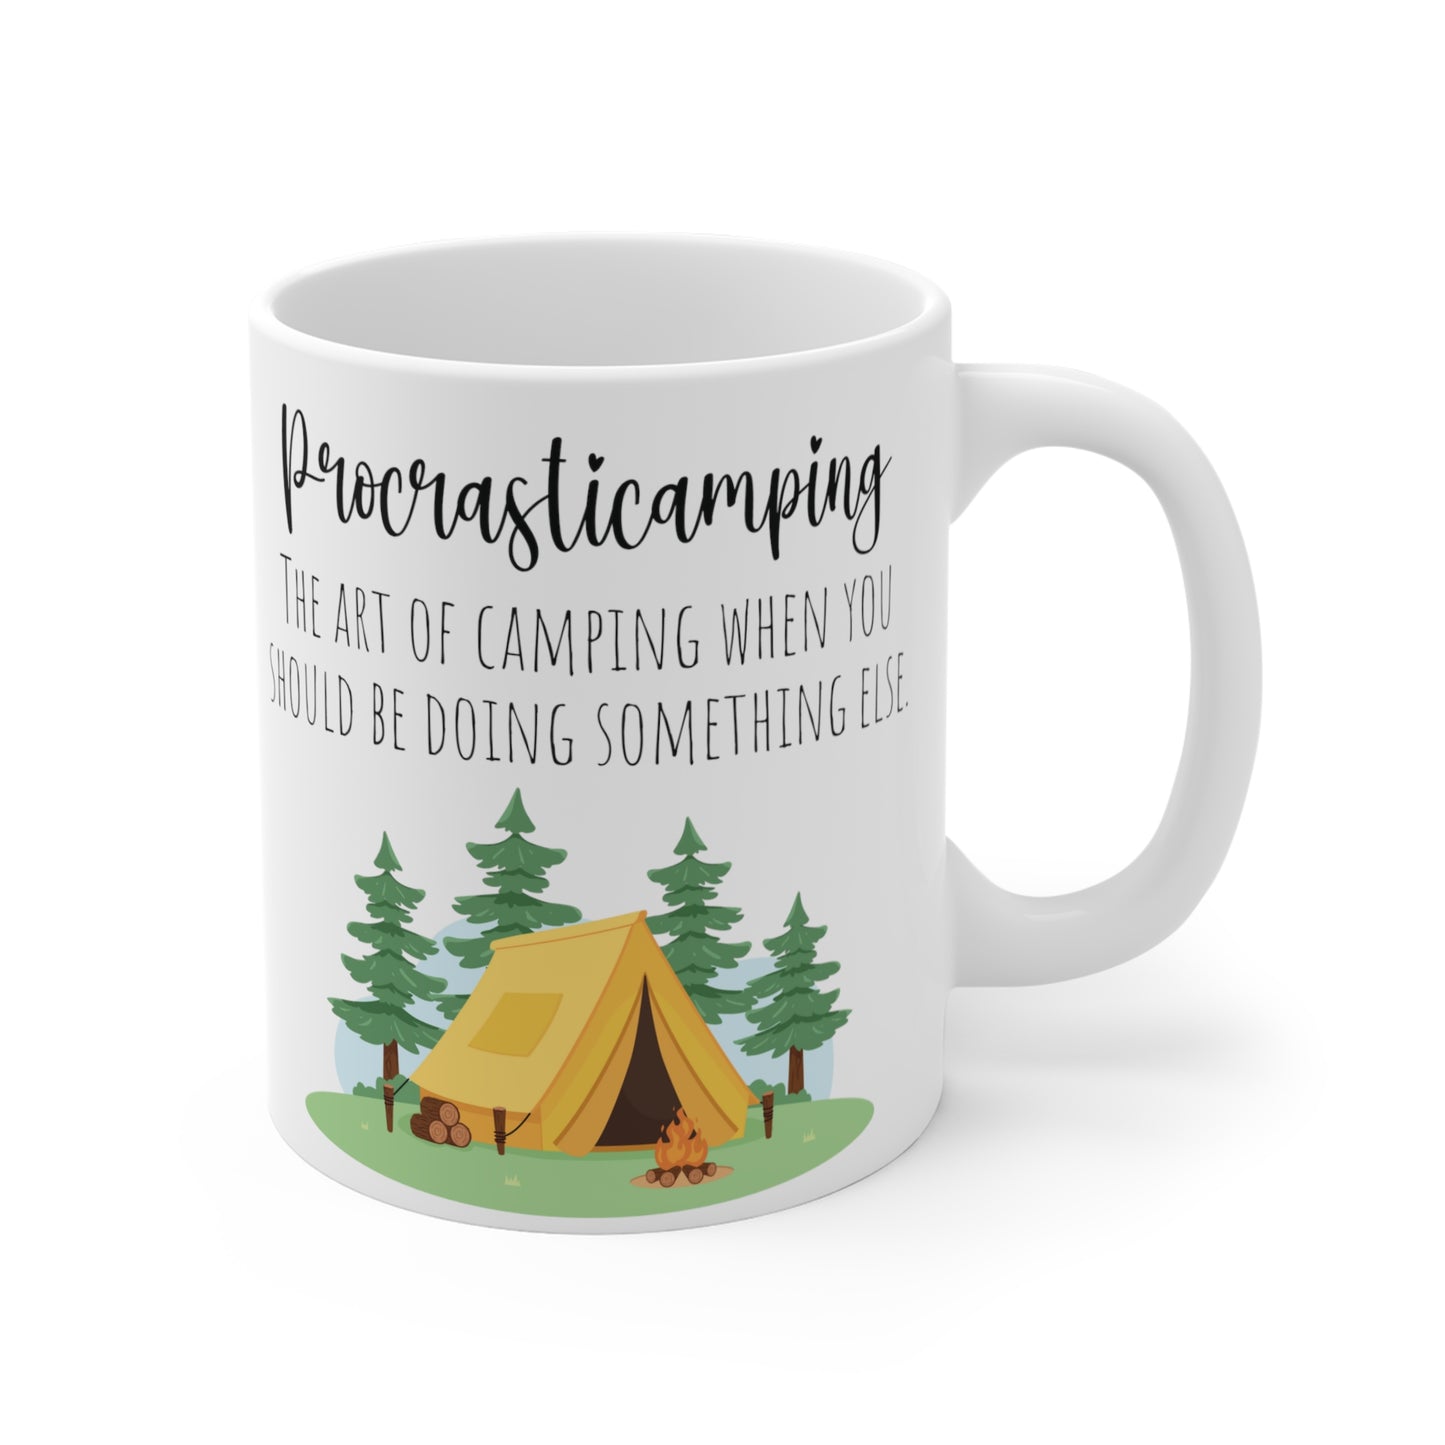 Camping Coffee Mug Procrasticamping Camping When You Should Be Doing Something Else